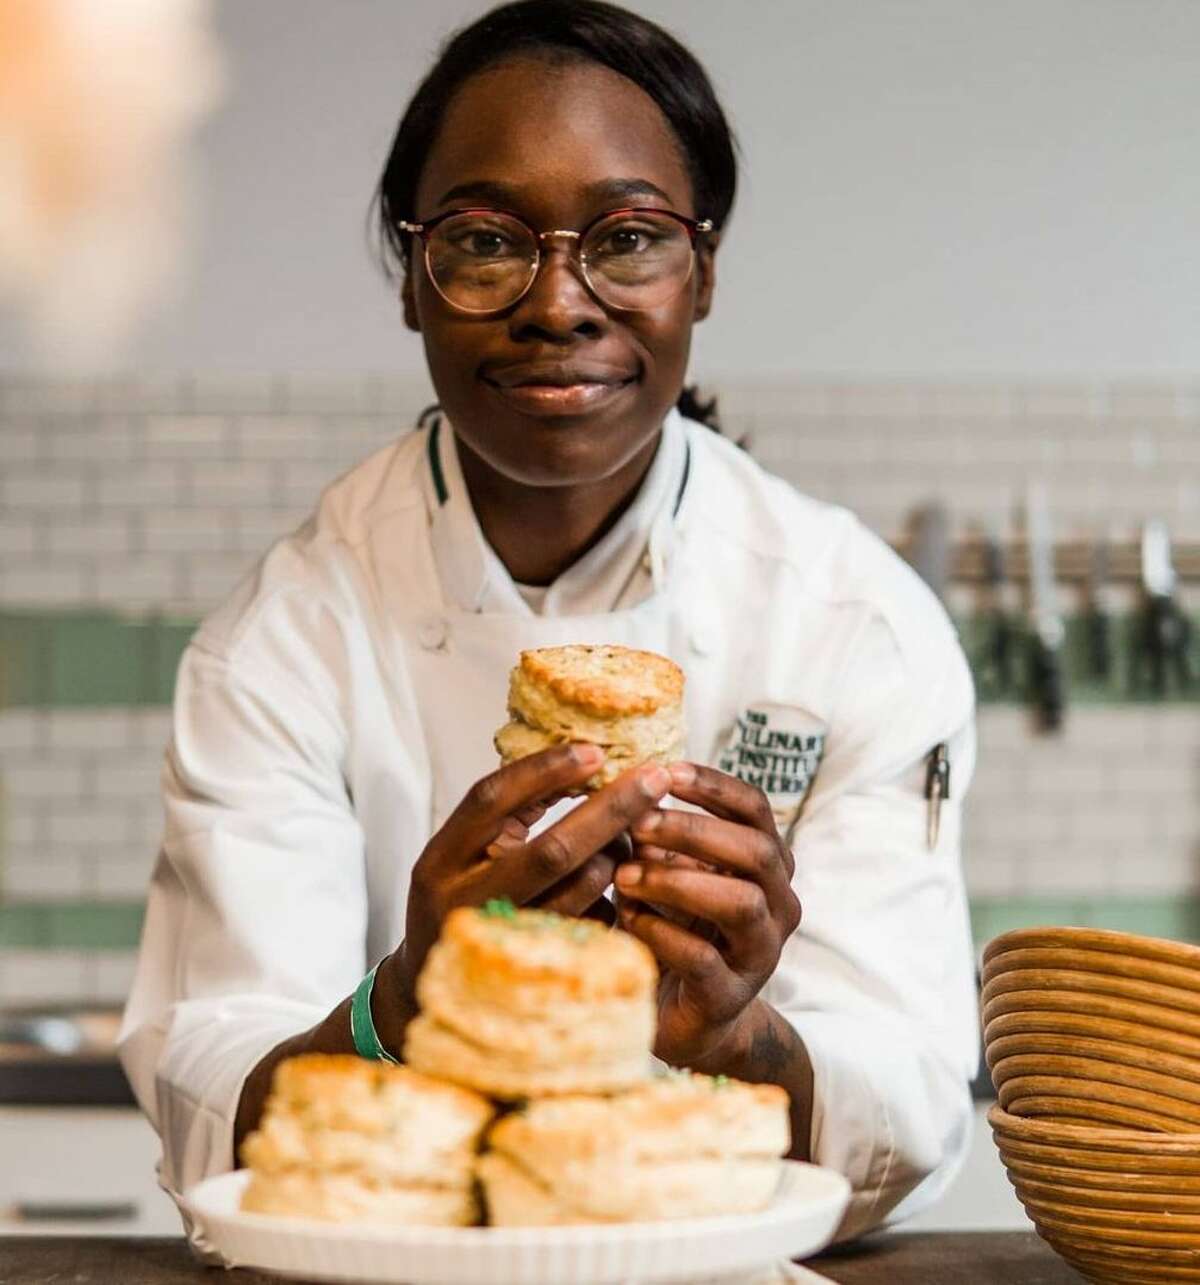 Roshara Sanders, “Chef Ro,” is finishing up her first year as the first female Black chef instructor at the Culinary Institute of America in Hyde Park. “I want to be the Black, female version of chef José Andrés. God sent me here to make real changes.” 